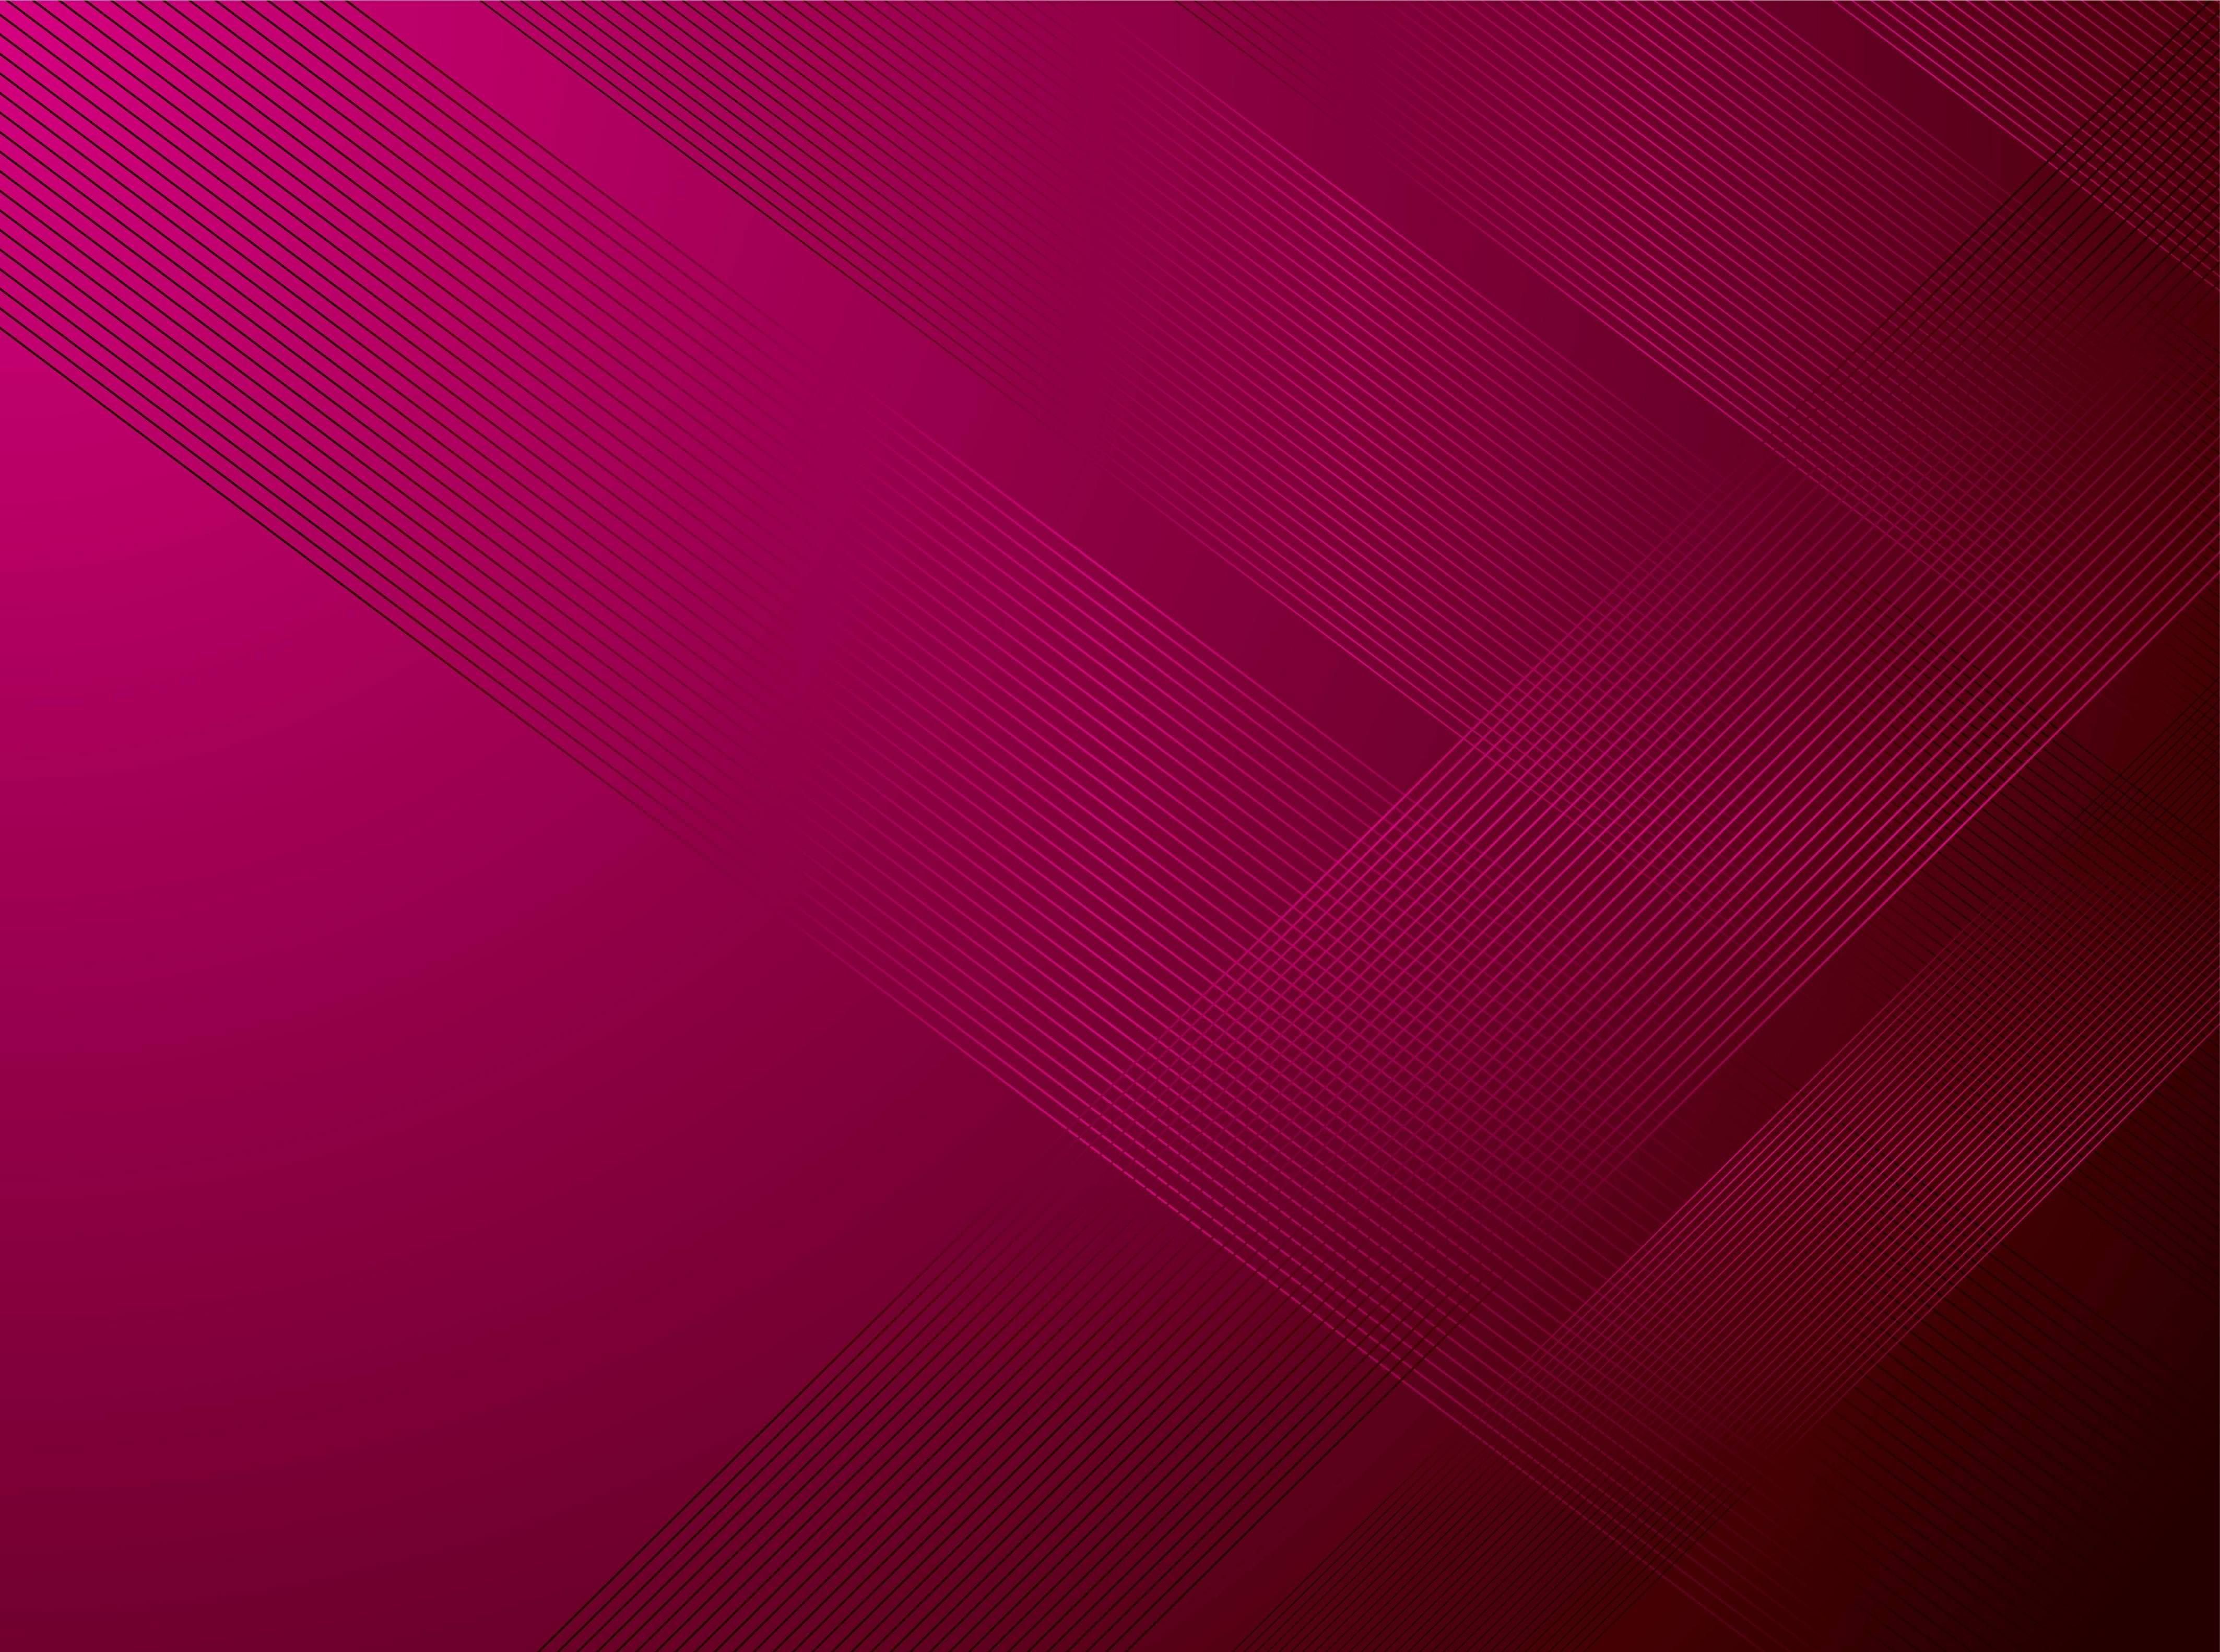 A dark pink abstract background with diagonal lines. - Magenta